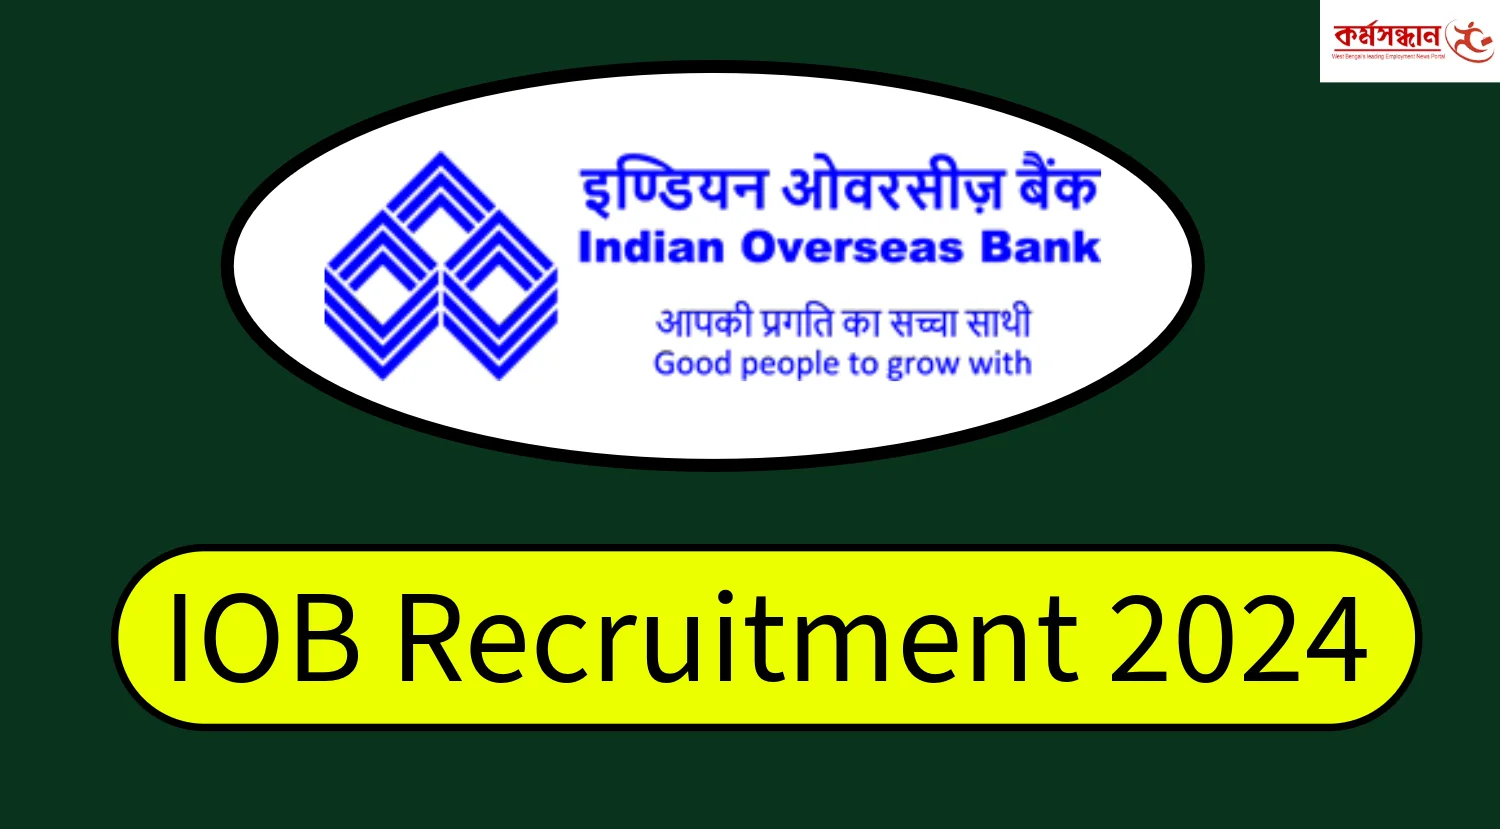 Daravath Mohan - Assistant Manager - INDIAN OVERSEAS BANK | LinkedIn